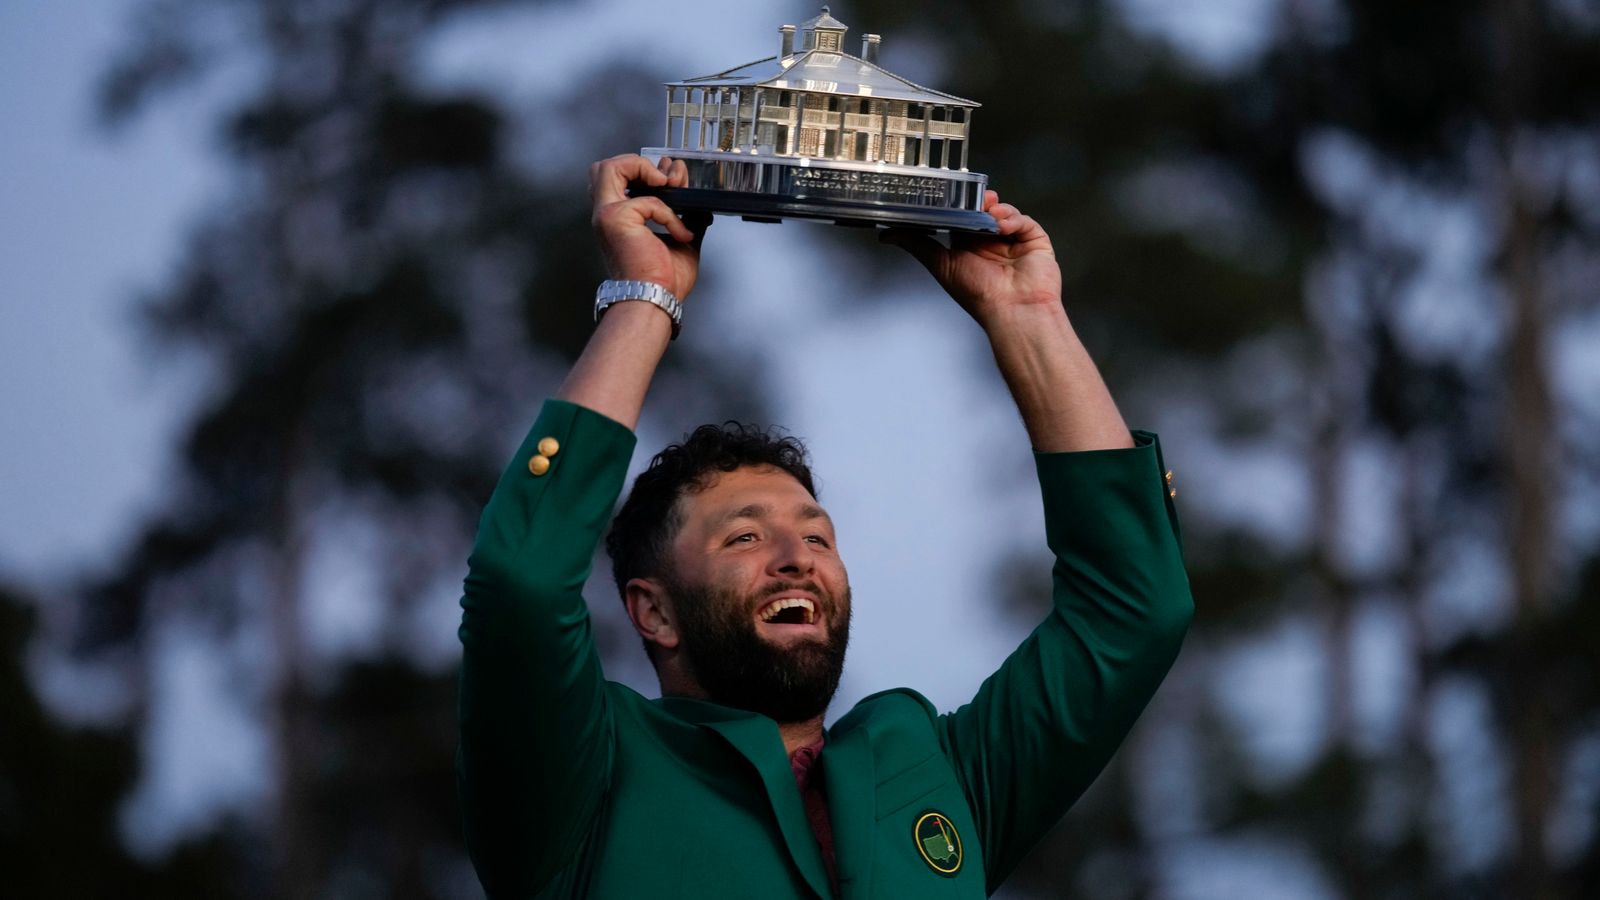  Spain's Jon Rahm pays tribute to Seve Ballesteros after second Masters win